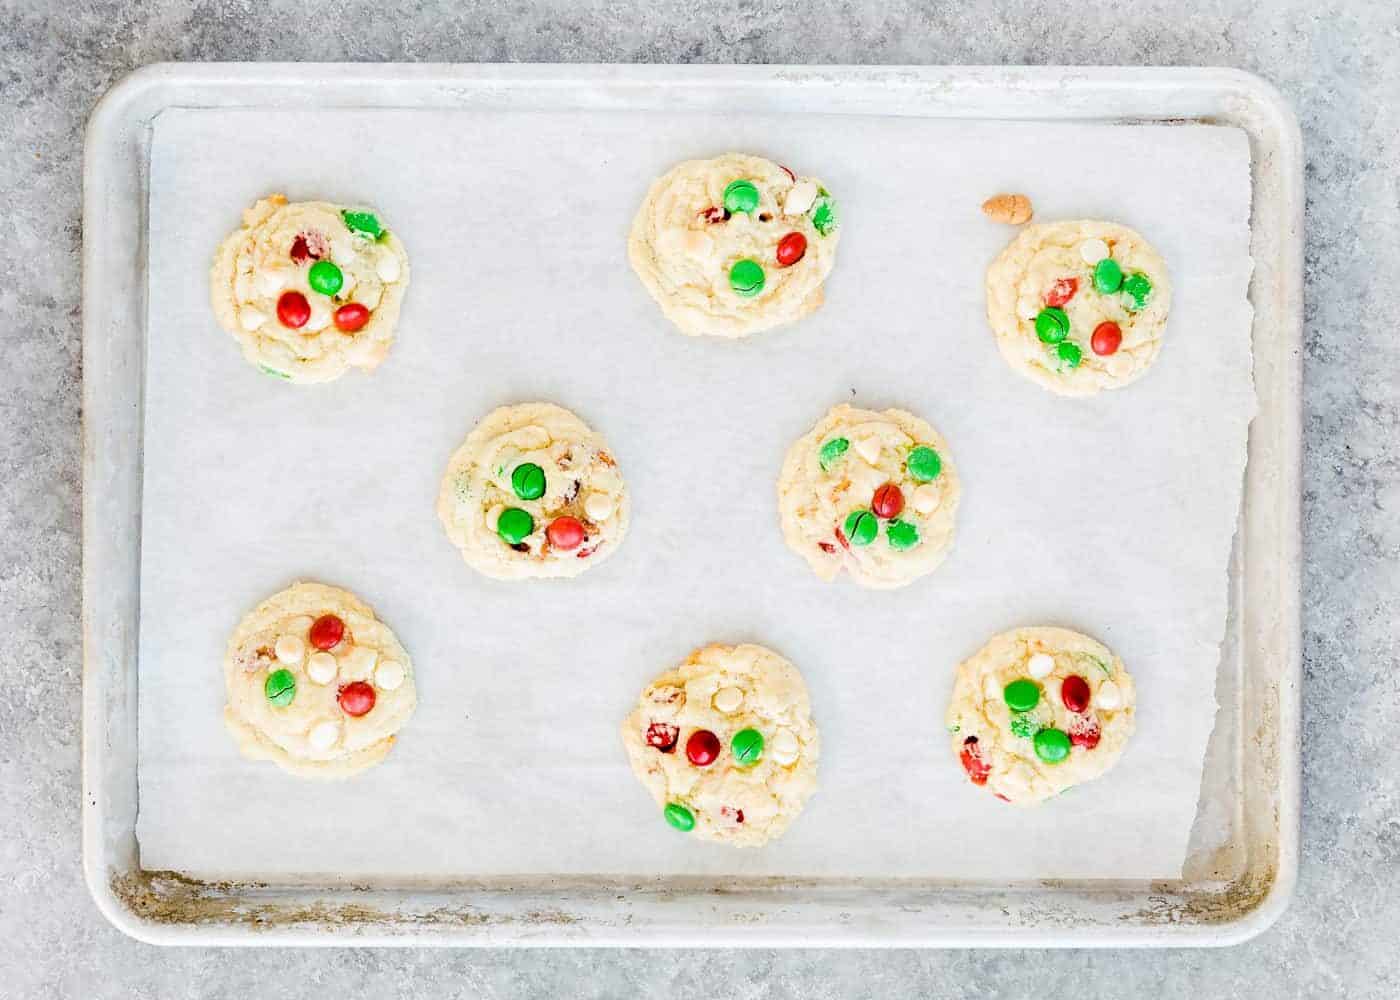 baked egg-free Christmas cookies on a baking sheet.